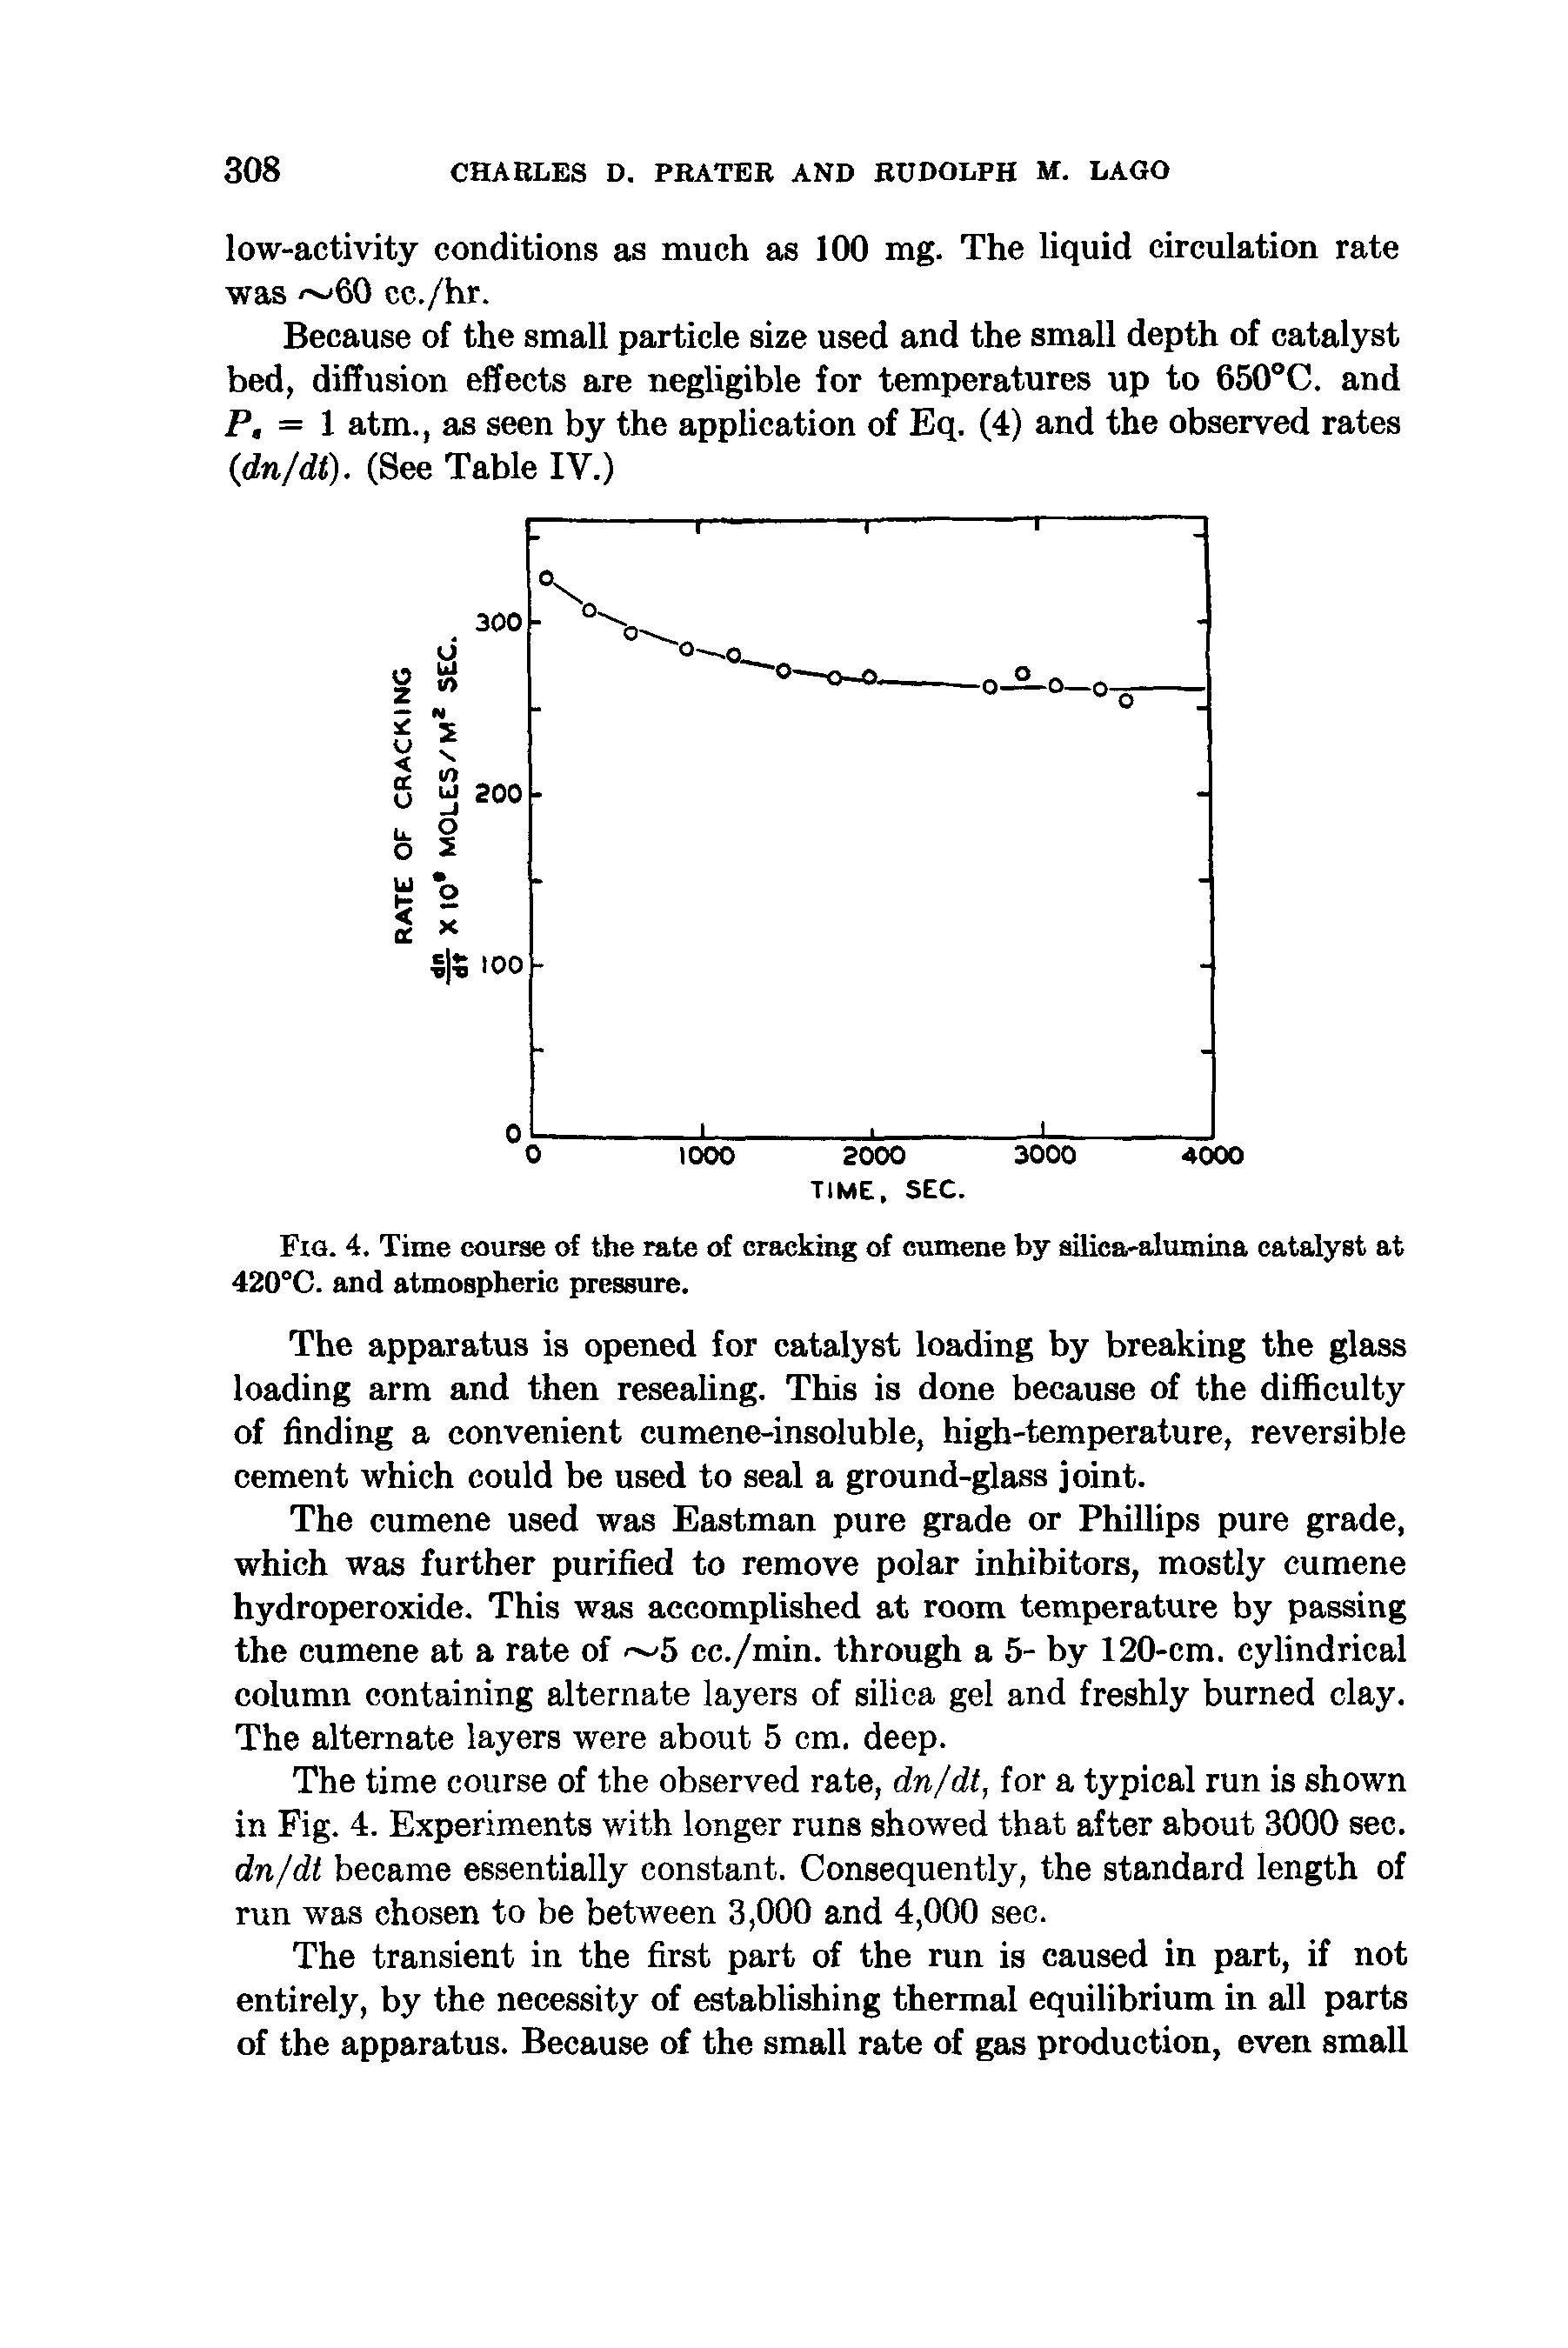 Fig. 4. Time course of the rate of cracking of cumene by silica-alumina catalyst at 420°C. and atmospheric pressure.